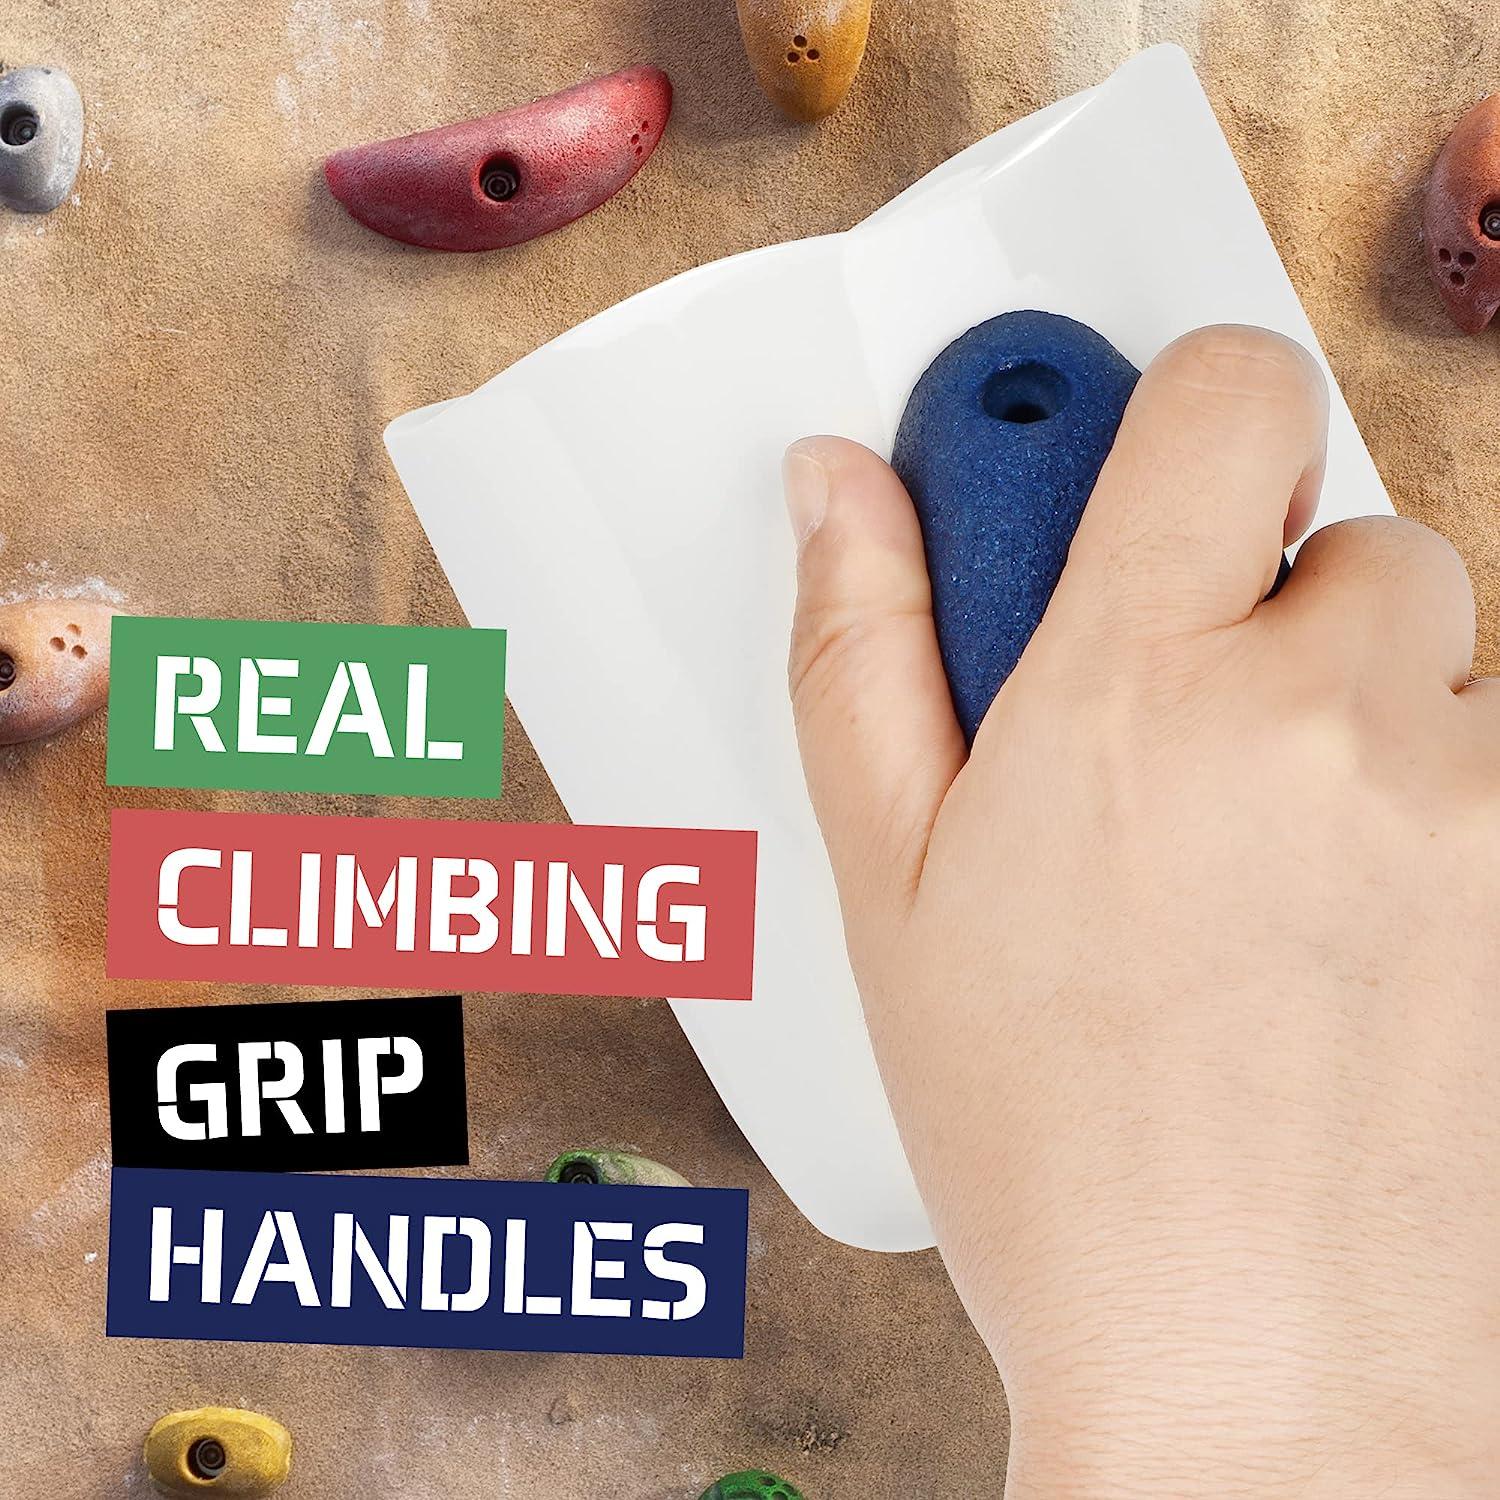 33 Rockin' Gifts For Rock Climbers And Boulderers That Don't Suck